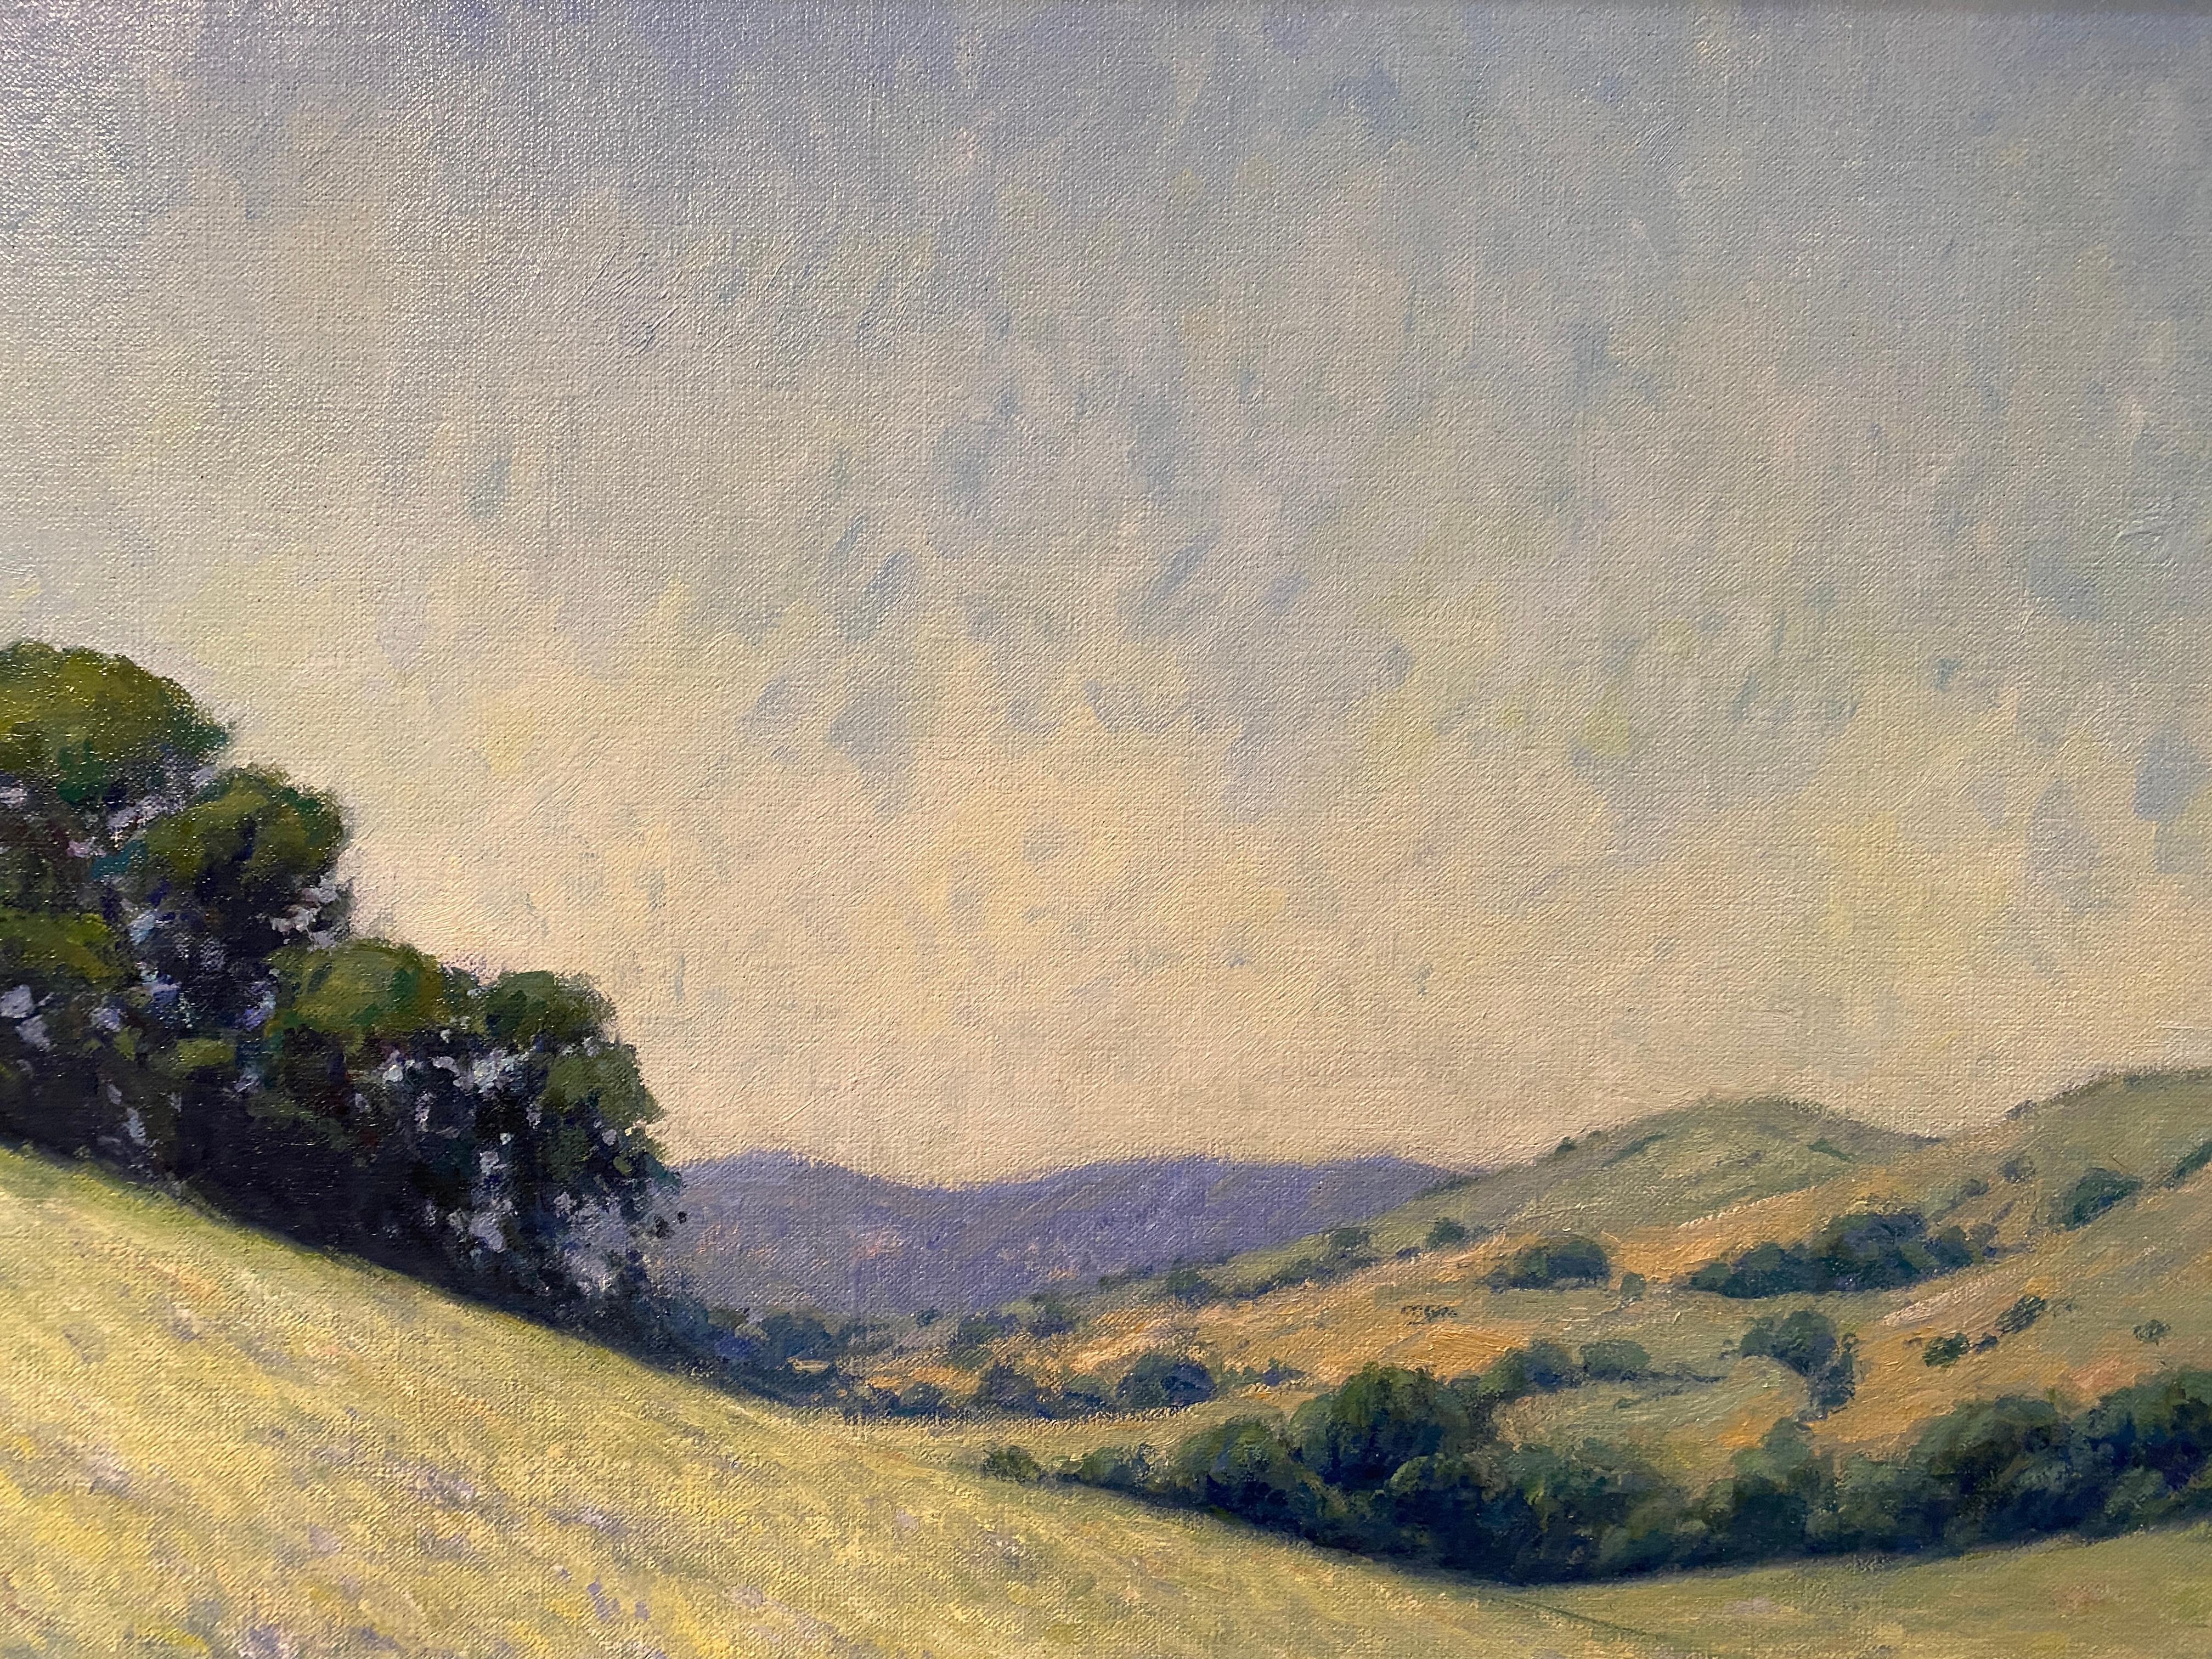 Oil painting of lupine fields at Toro Park, in California. A sunny day makes a bright blue sky, which fades to white as it inches towards the horizon. The horizon is met with distant mountains, painted in light purple. The hillsides roll diagonally